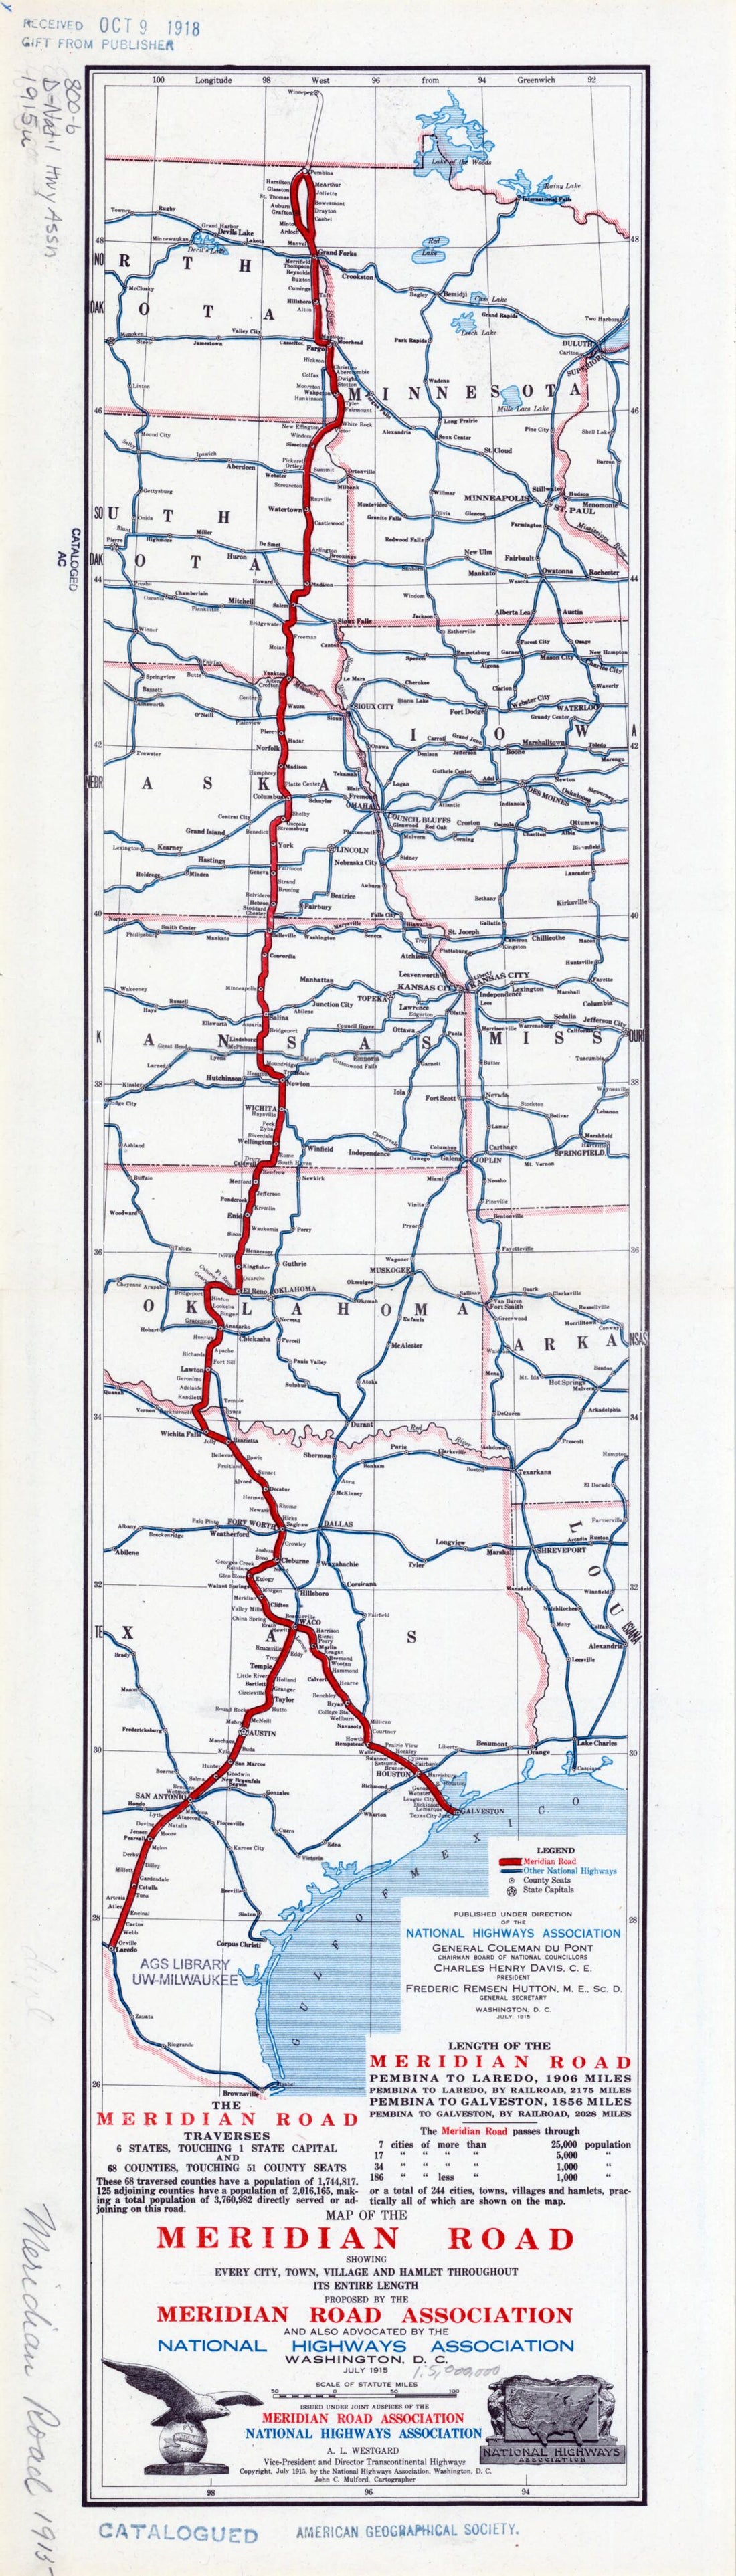 This old map of Map of the Meridian Road. (Map of the Meridian Road: Showing Every City, Town, Village and Hamlet Throughout Its Entire Length) from 1915 was created by  Meridian Road Association, John C. Mulford,  National Highways Association in 1915